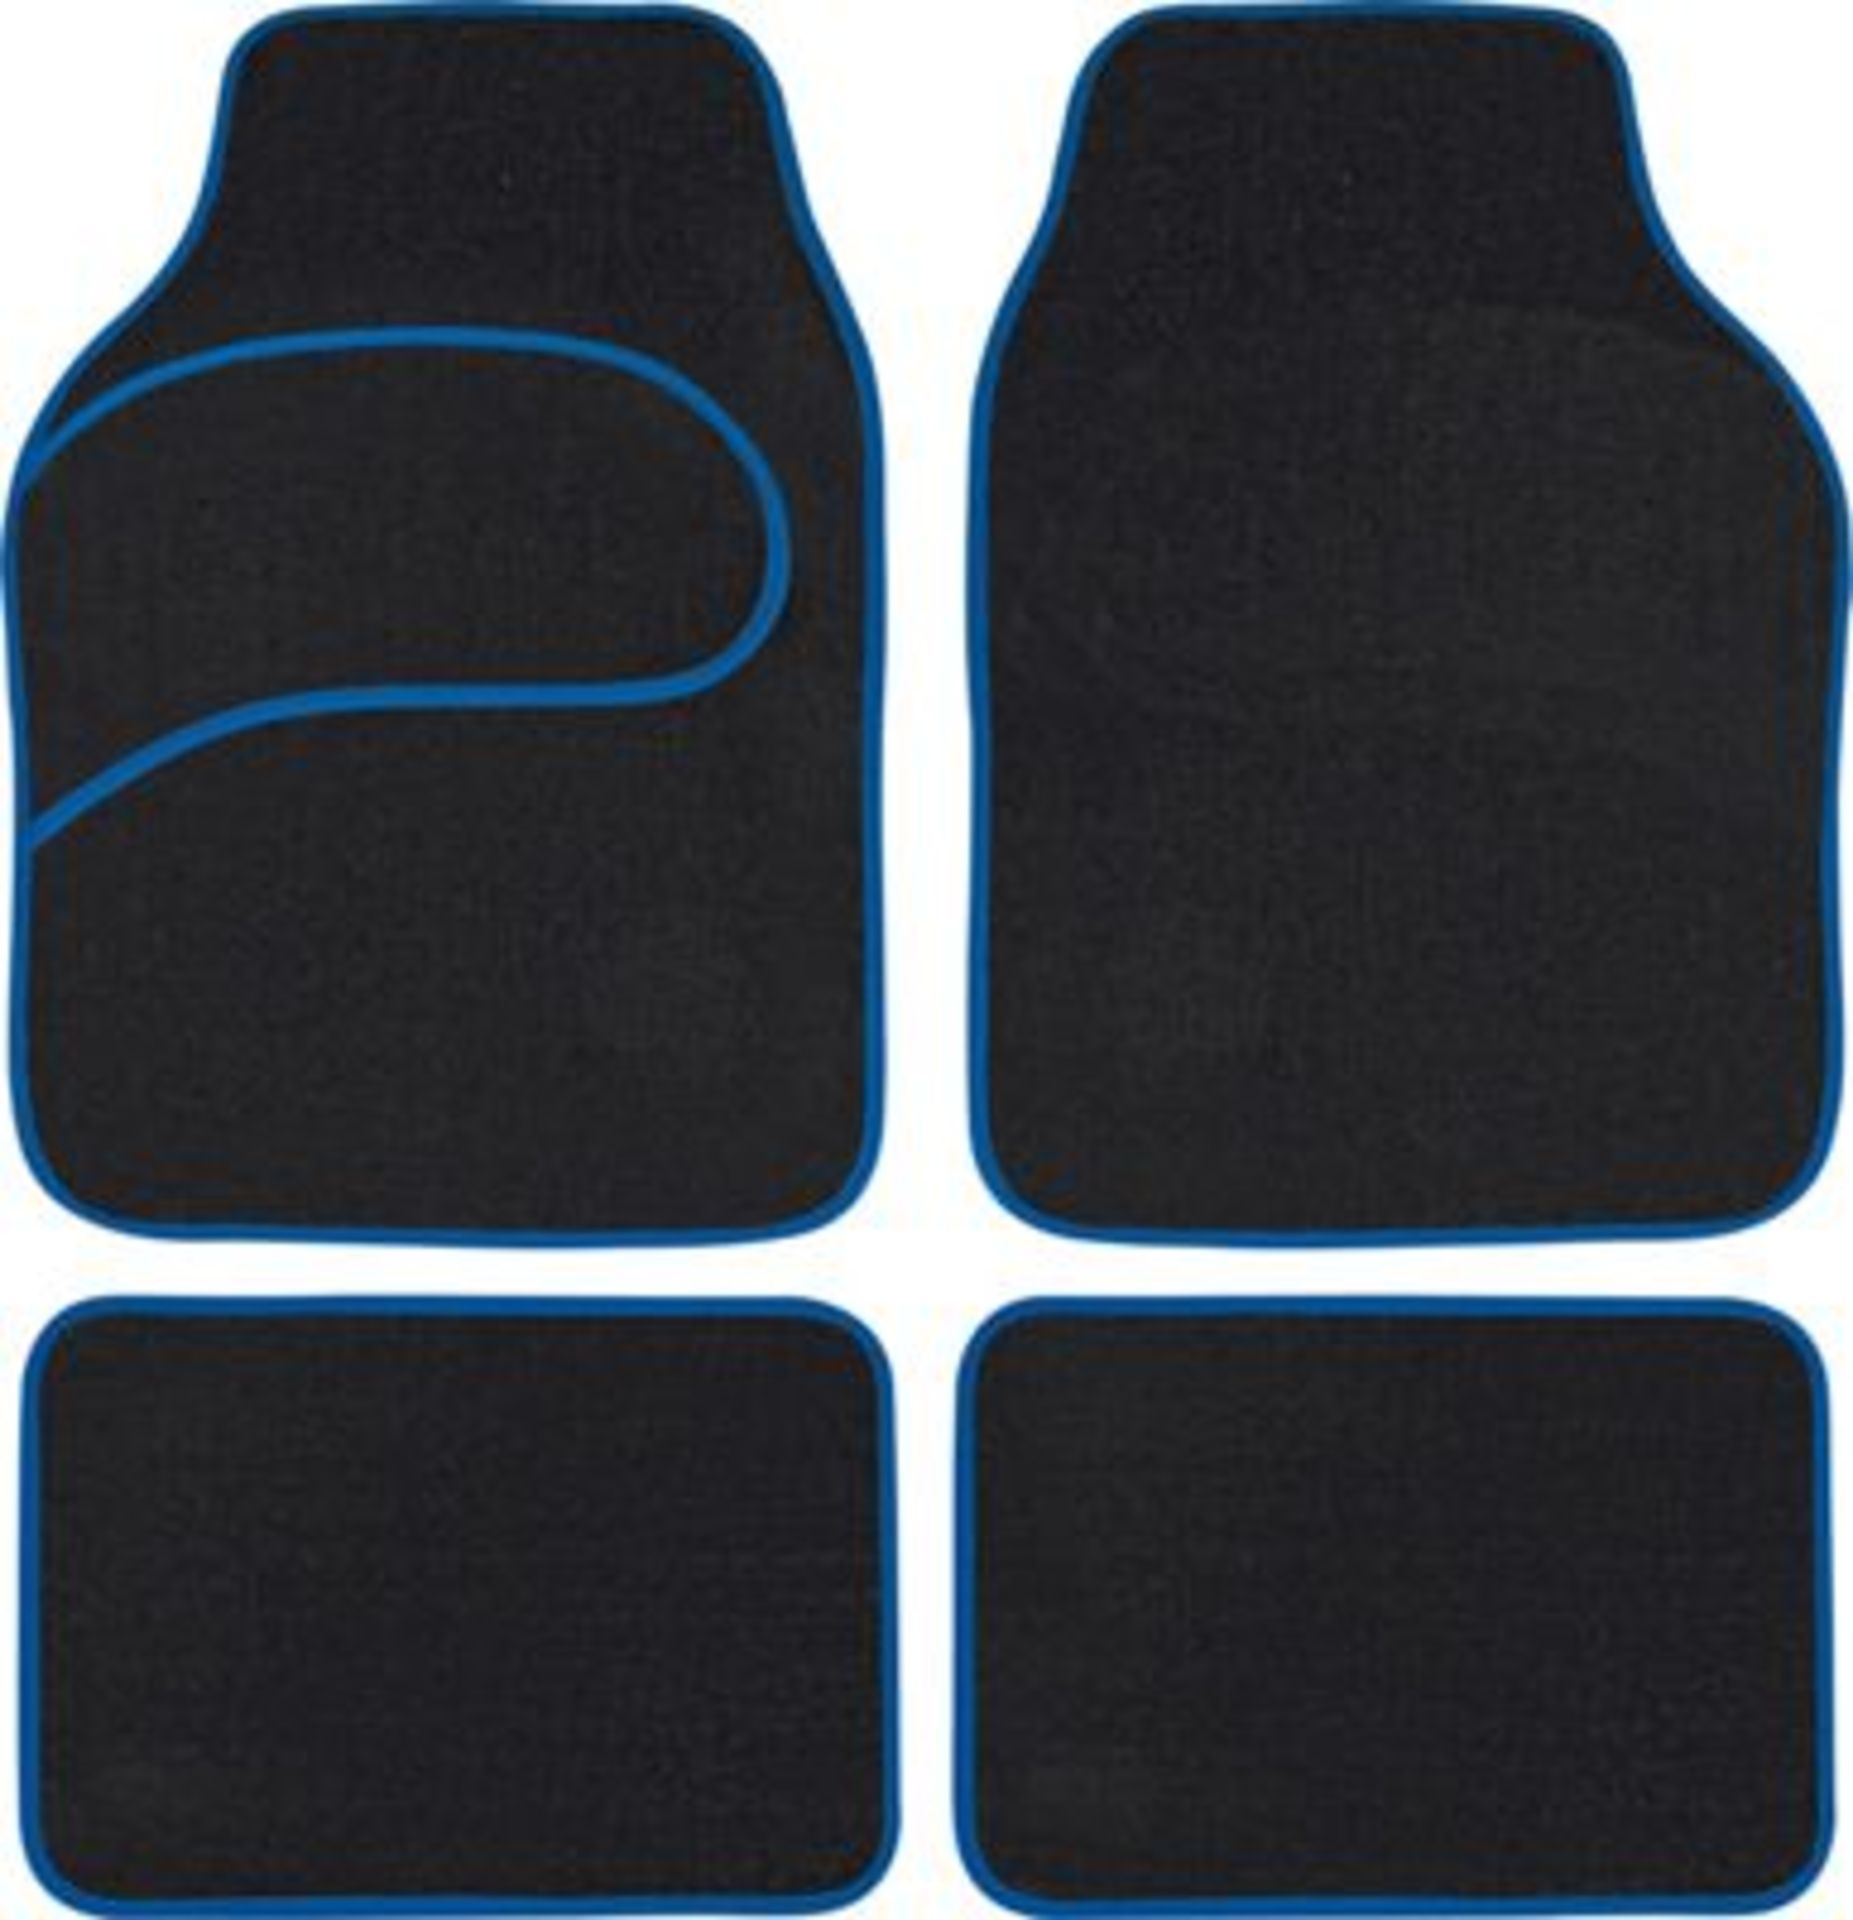 V Brand New Set of 4 Universal Fit Car Mats (Item does not have blue trim)